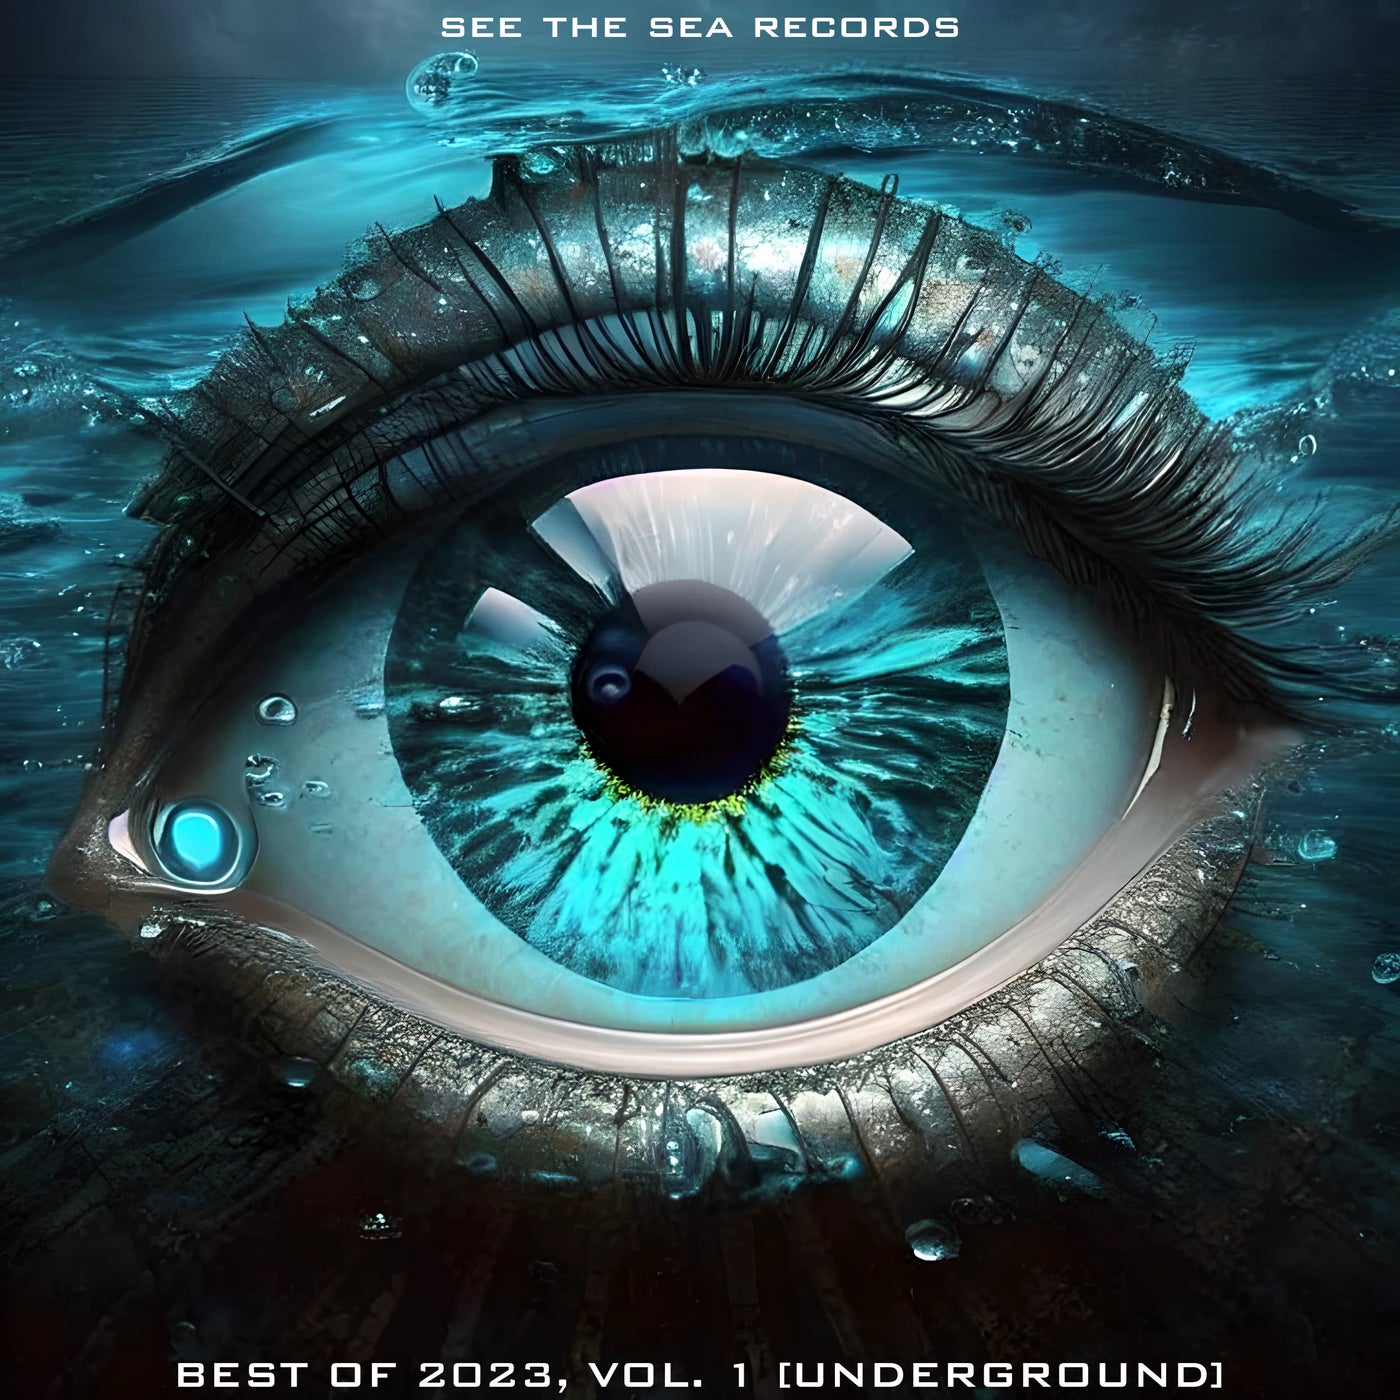 See The Sea Records: Best Of 2023, Vol. 1 [Underground]